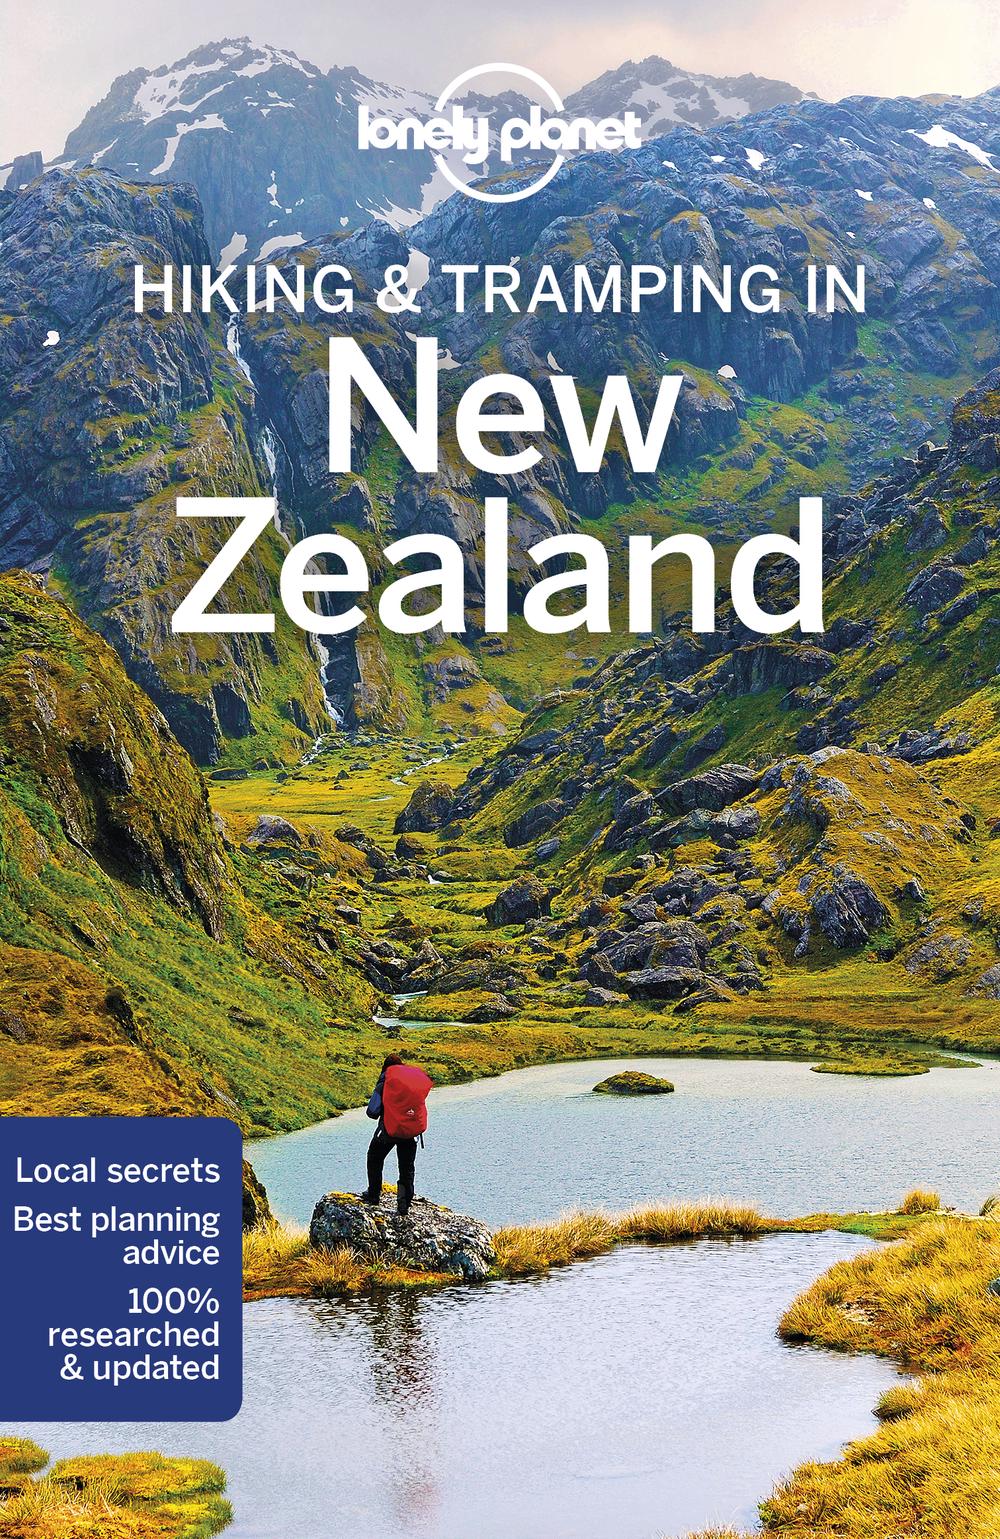 online　Paperback,　Tramping　Lonely　at　Lonely　Planet,　The　New　in　Planet　Hiking　Buy　9781786572691　Zealand　by　Nile